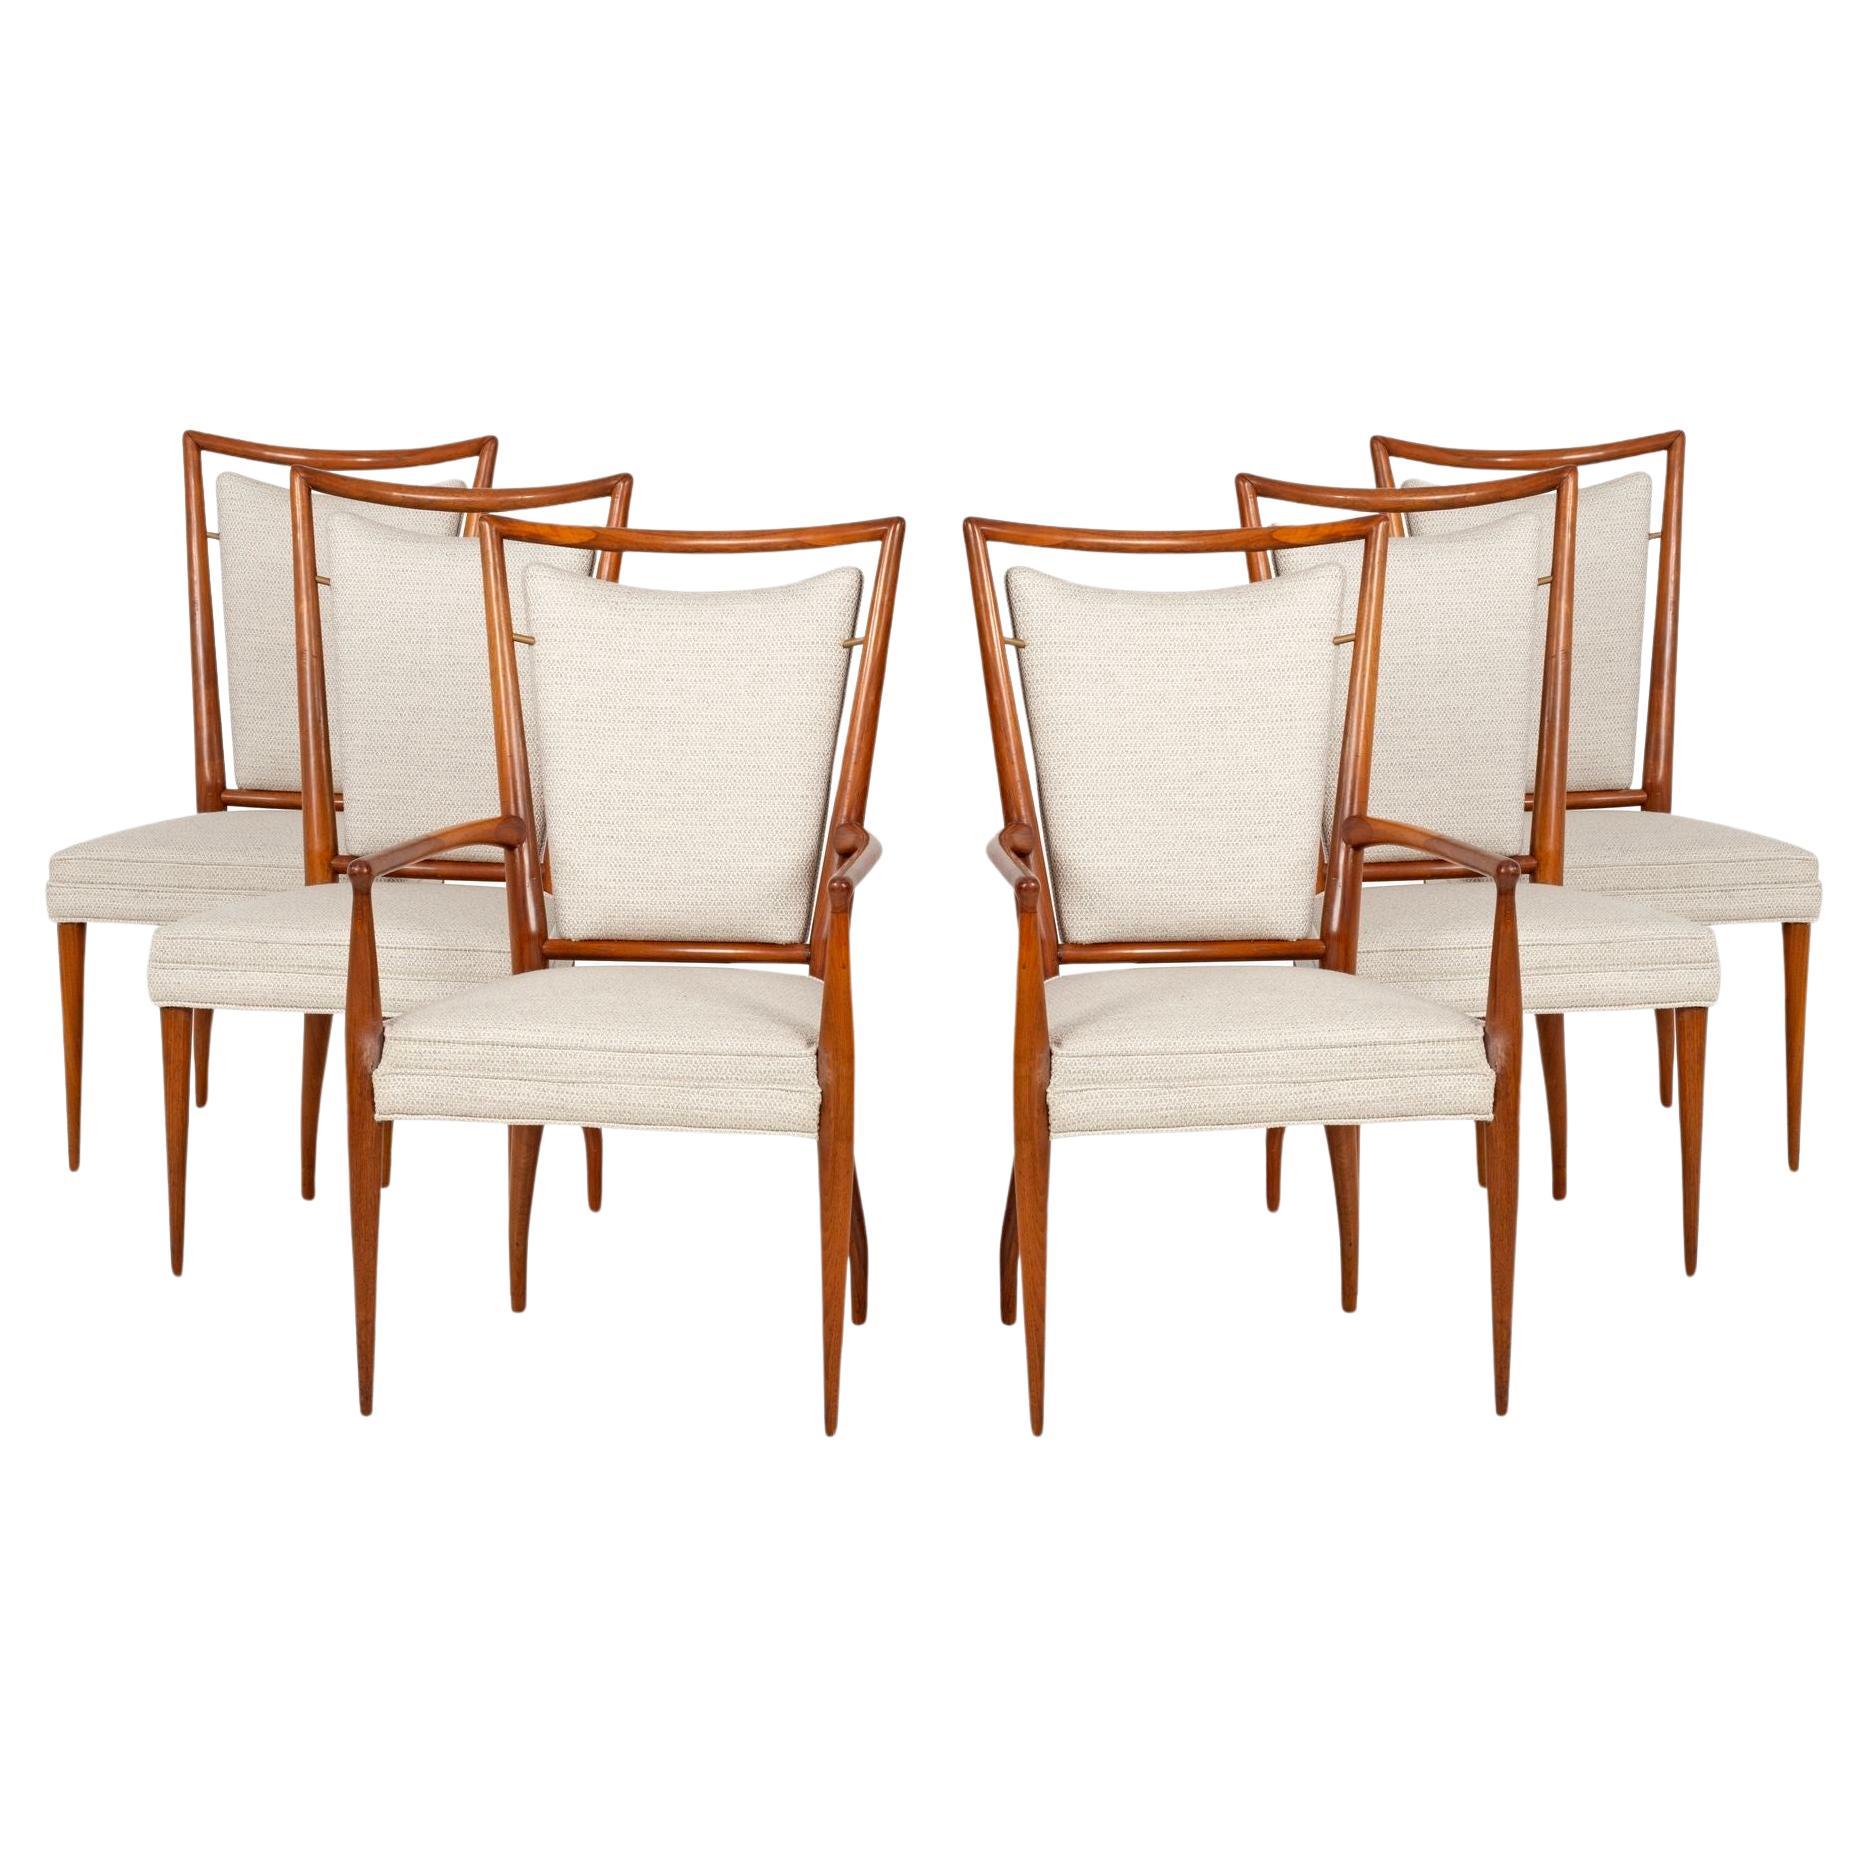 Pair of Six Dining Chairs by J. Stuart Clingman for Widdicomb